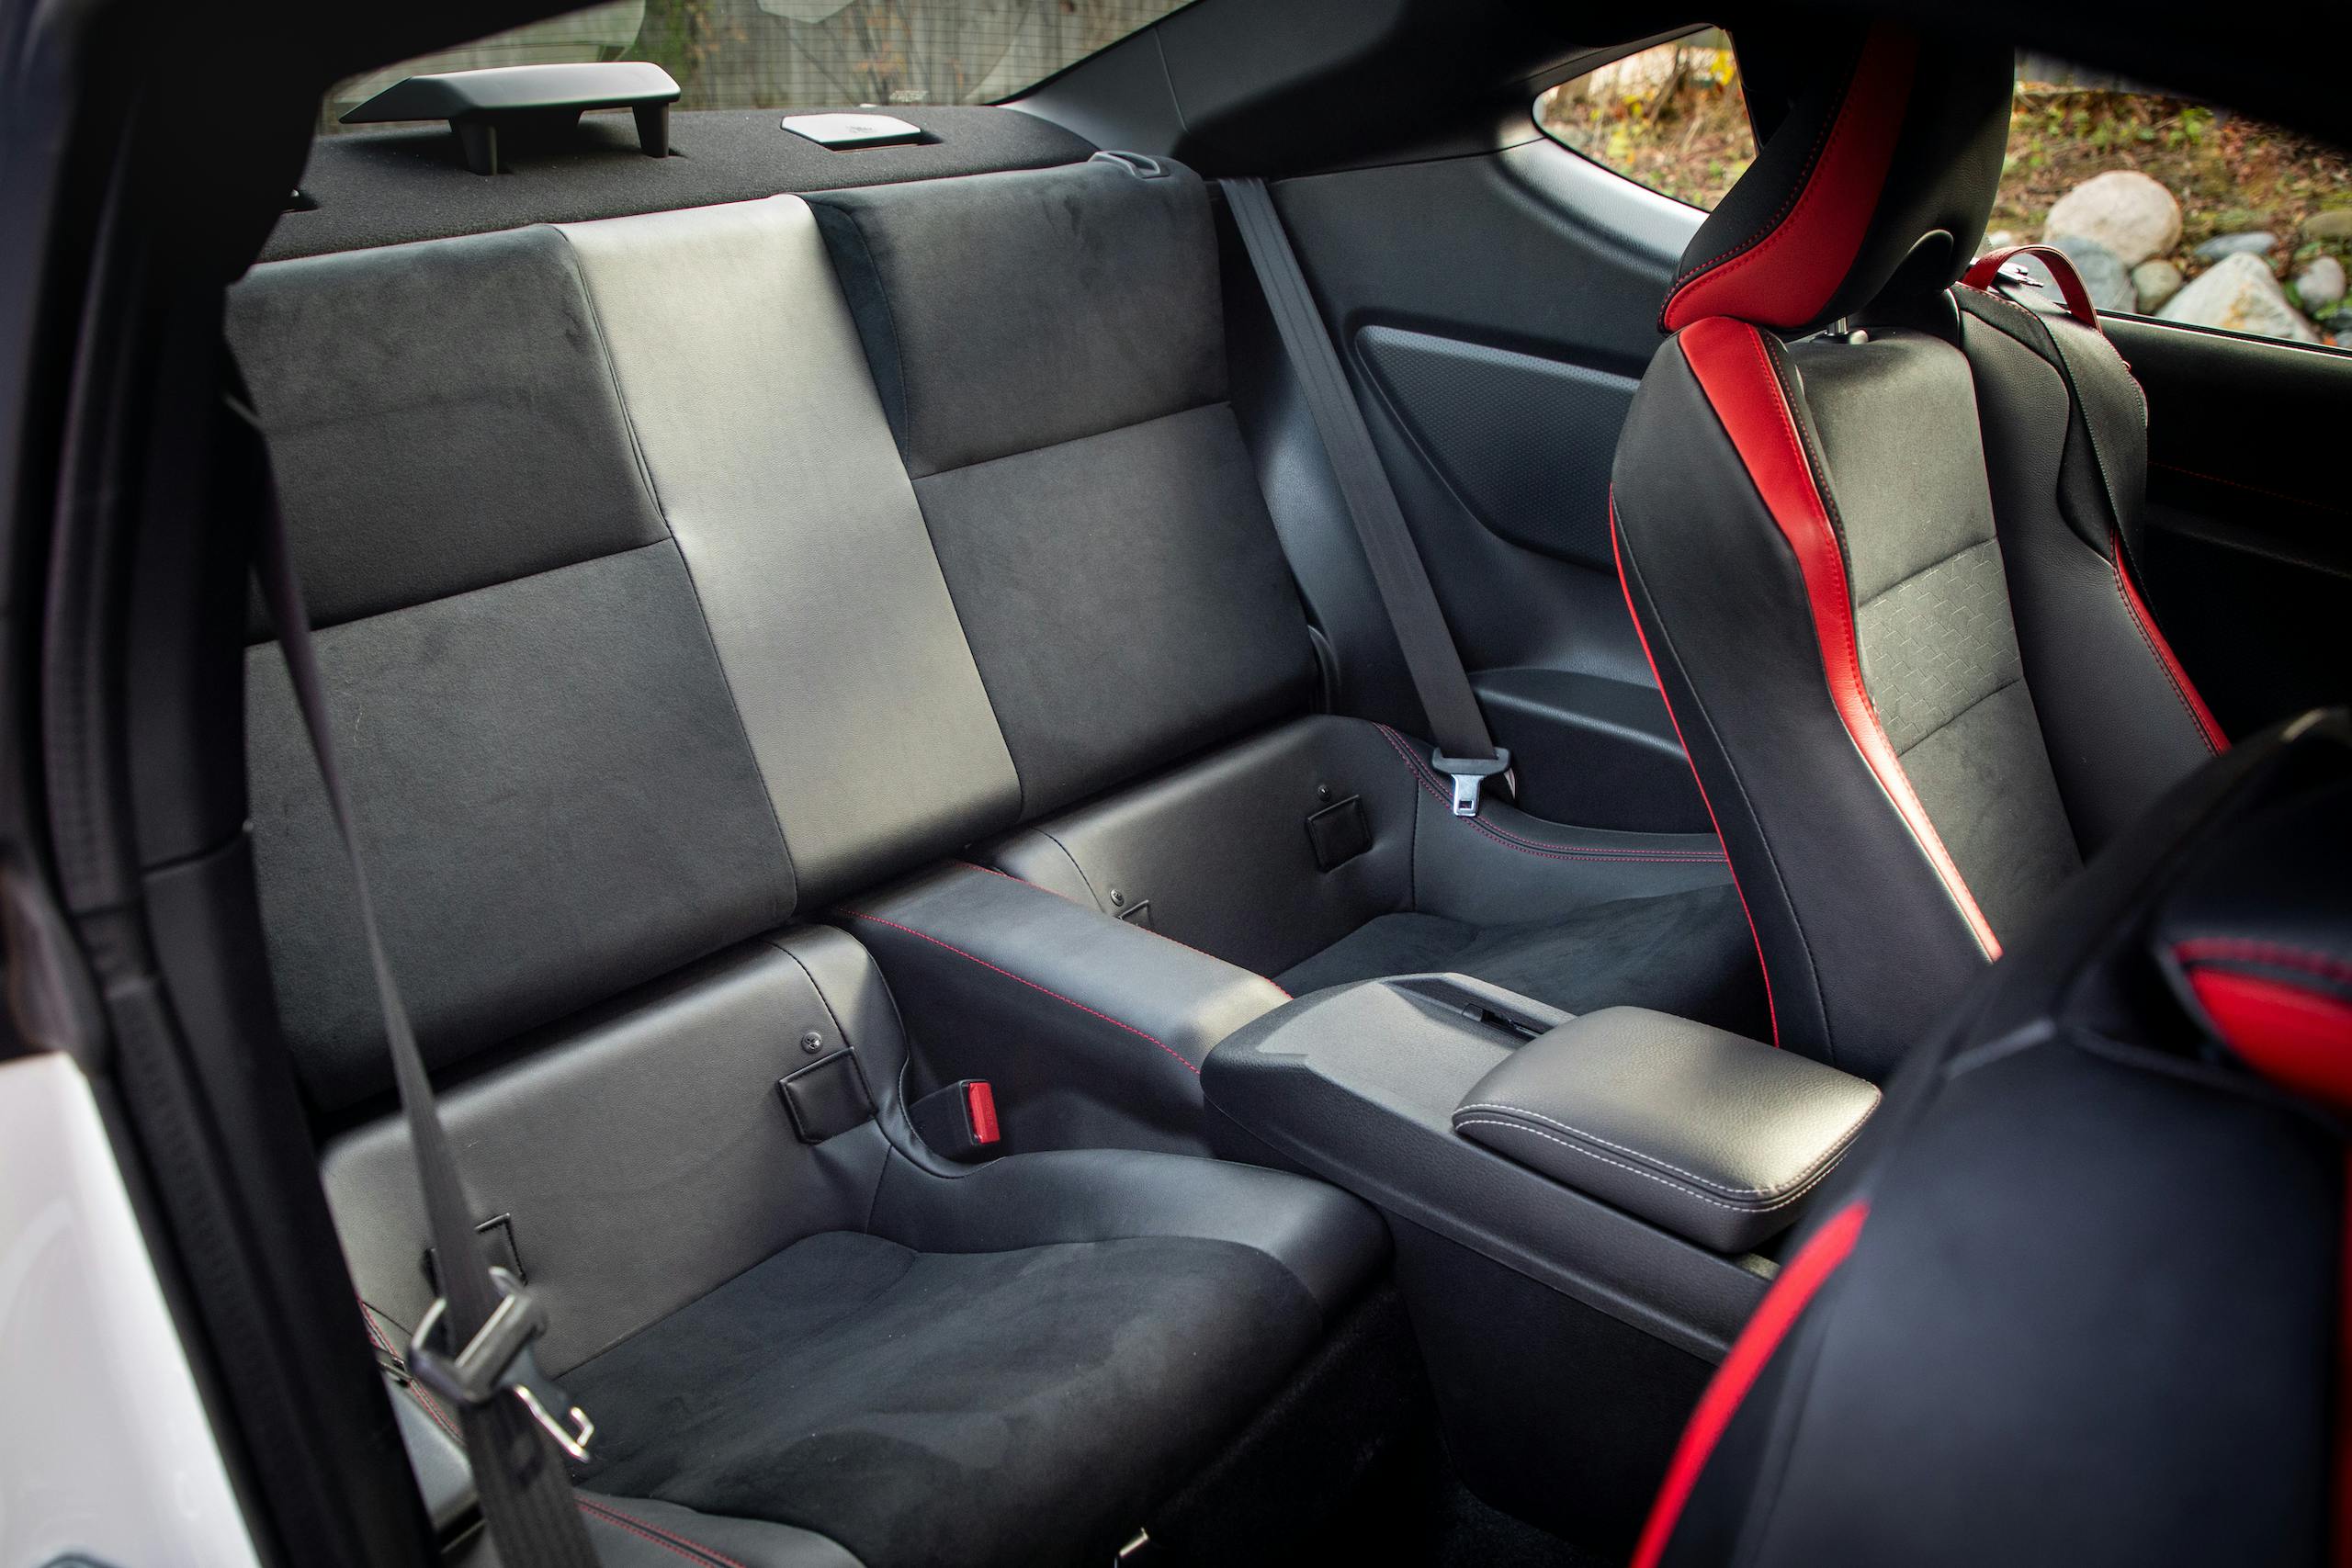 2020 Toyota 86 GT interior rear seat space